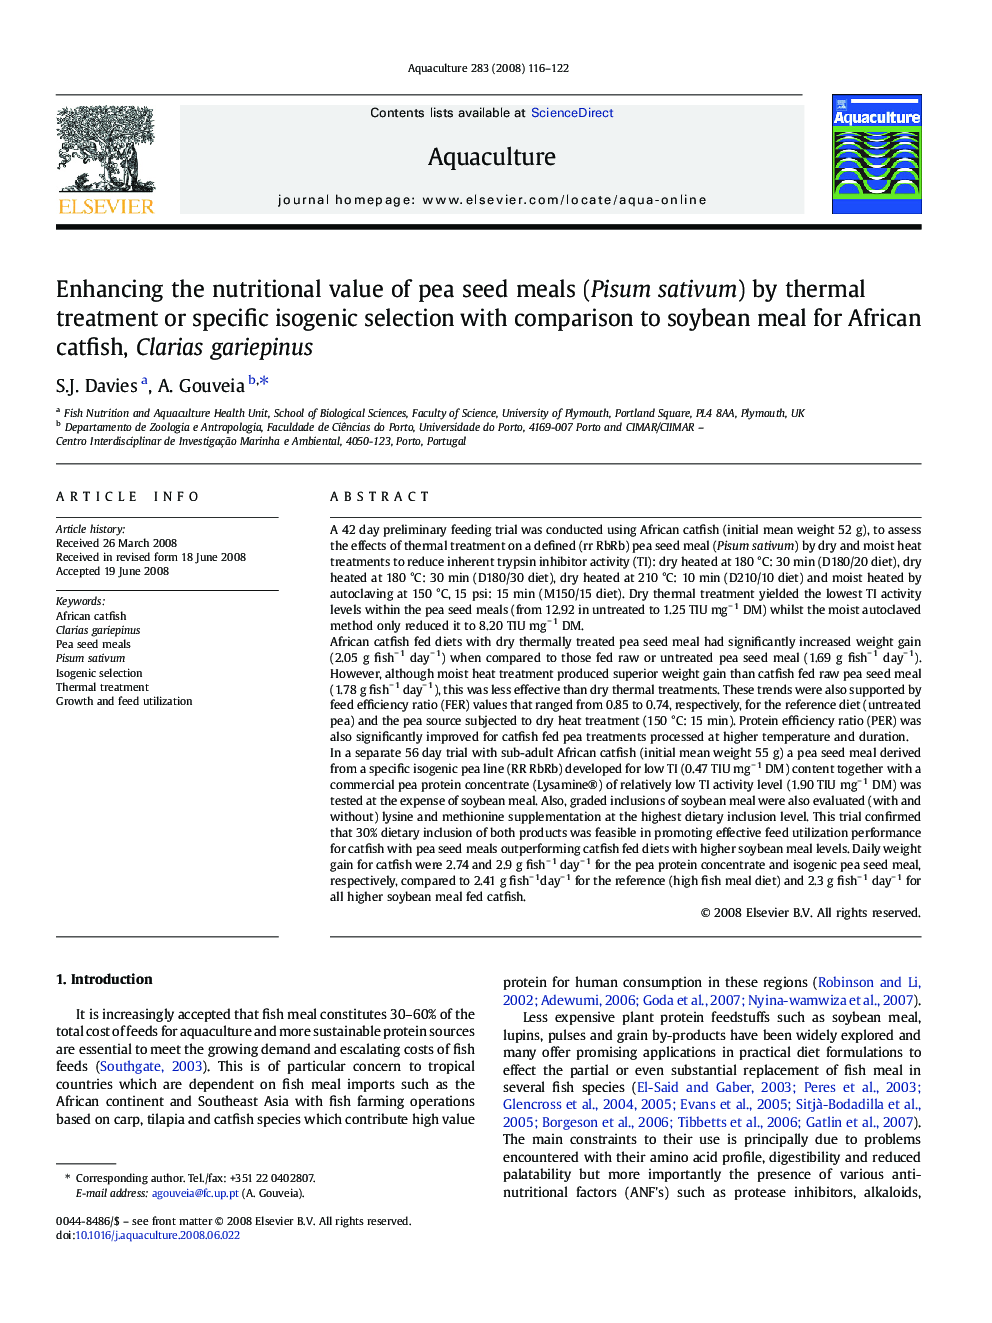 Enhancing the nutritional value of pea seed meals (Pisum sativum) by thermal treatment or specific isogenic selection with comparison to soybean meal for African catfish, Clarias gariepinus